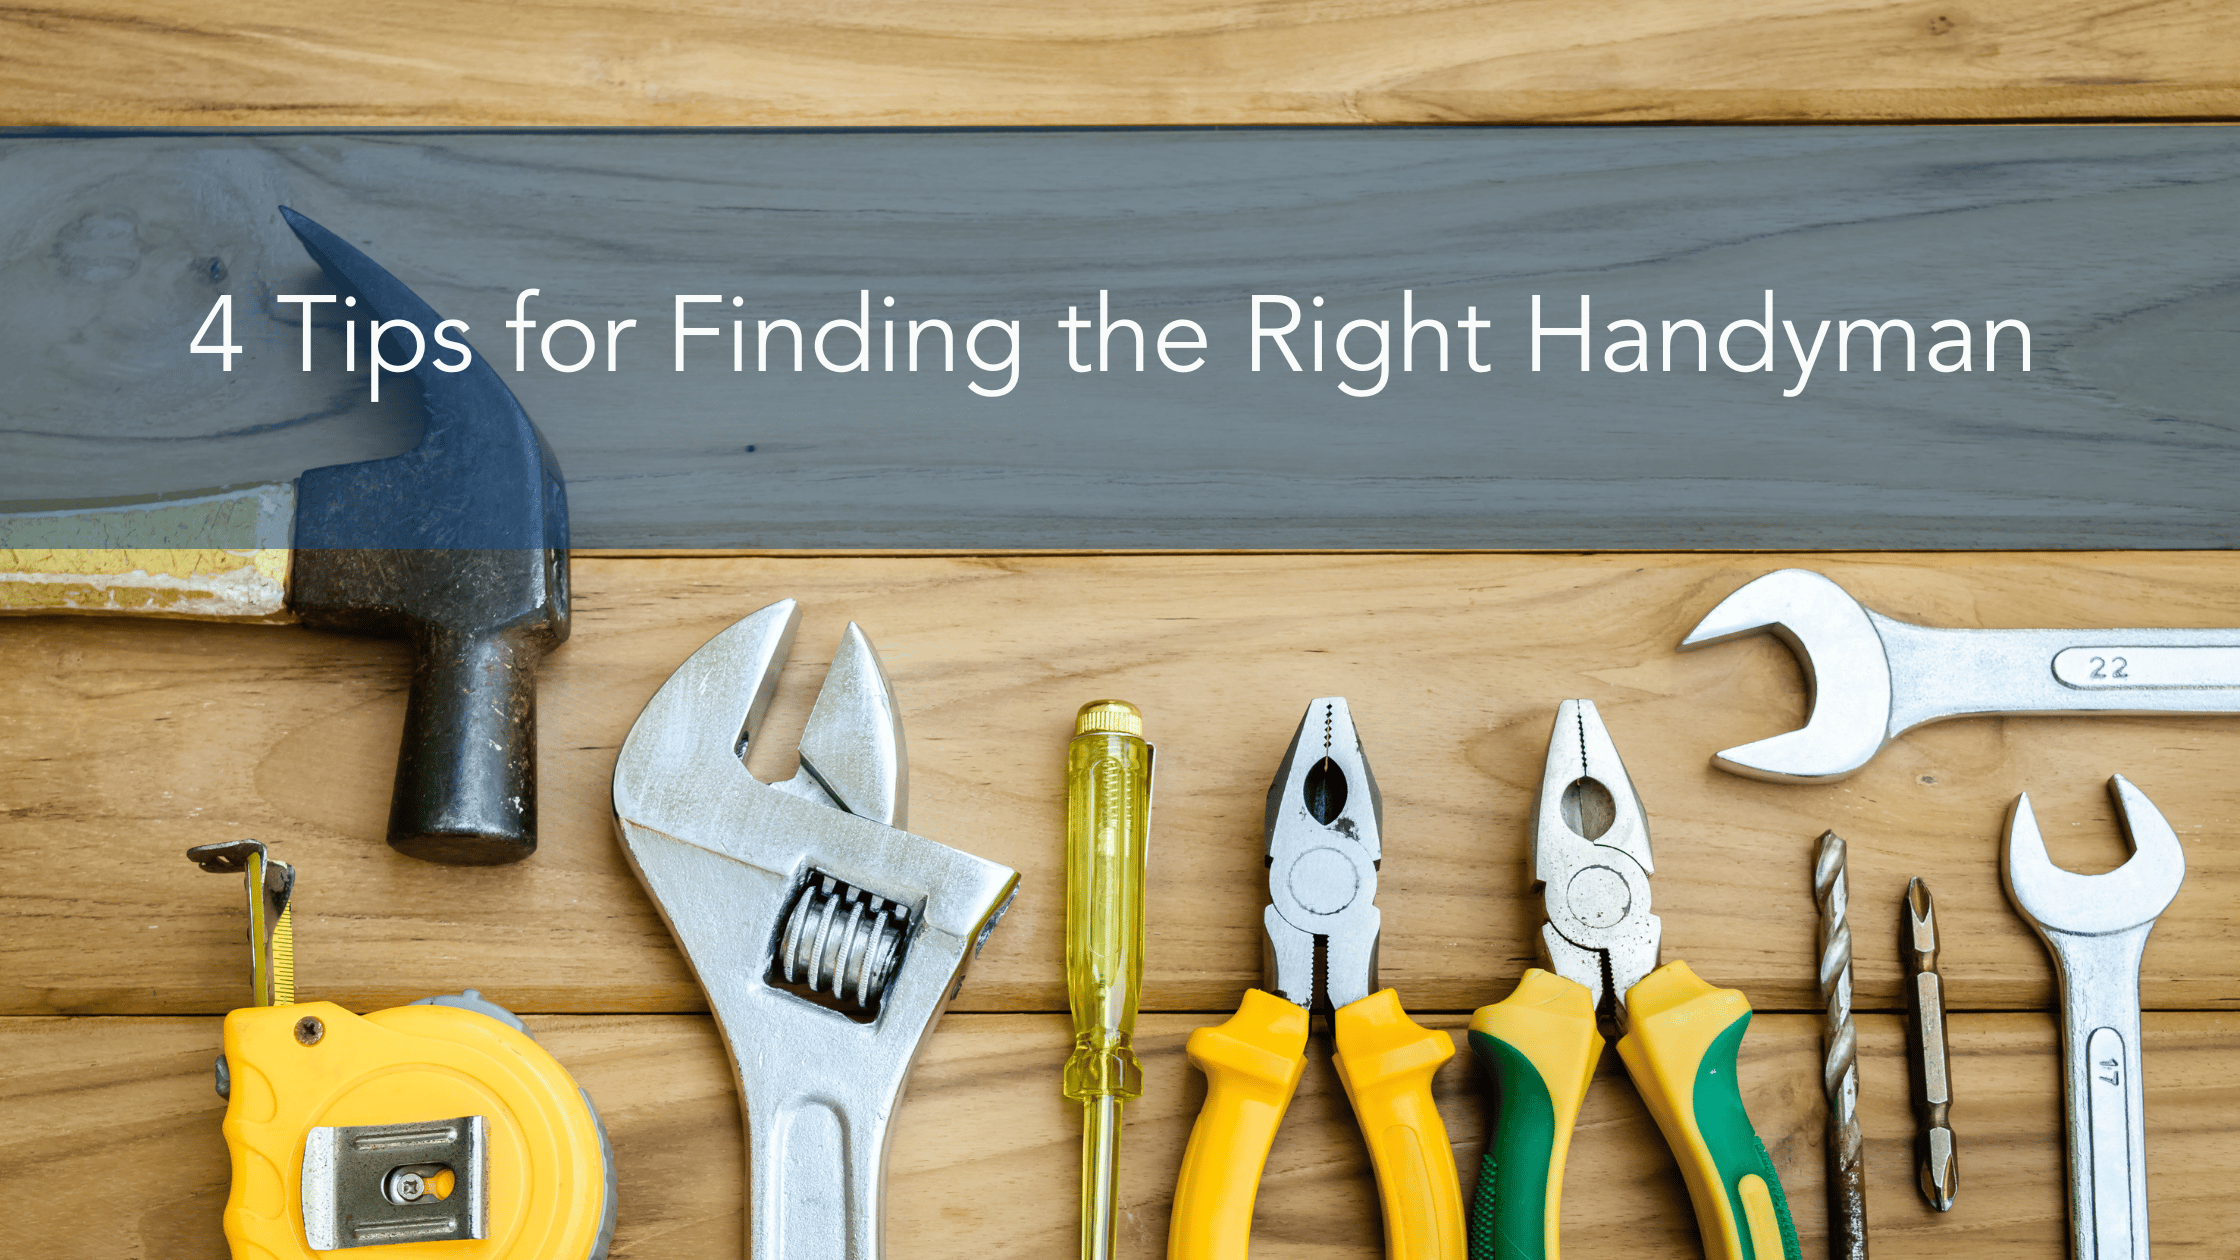 4 Tips for Finding the Right Handyman